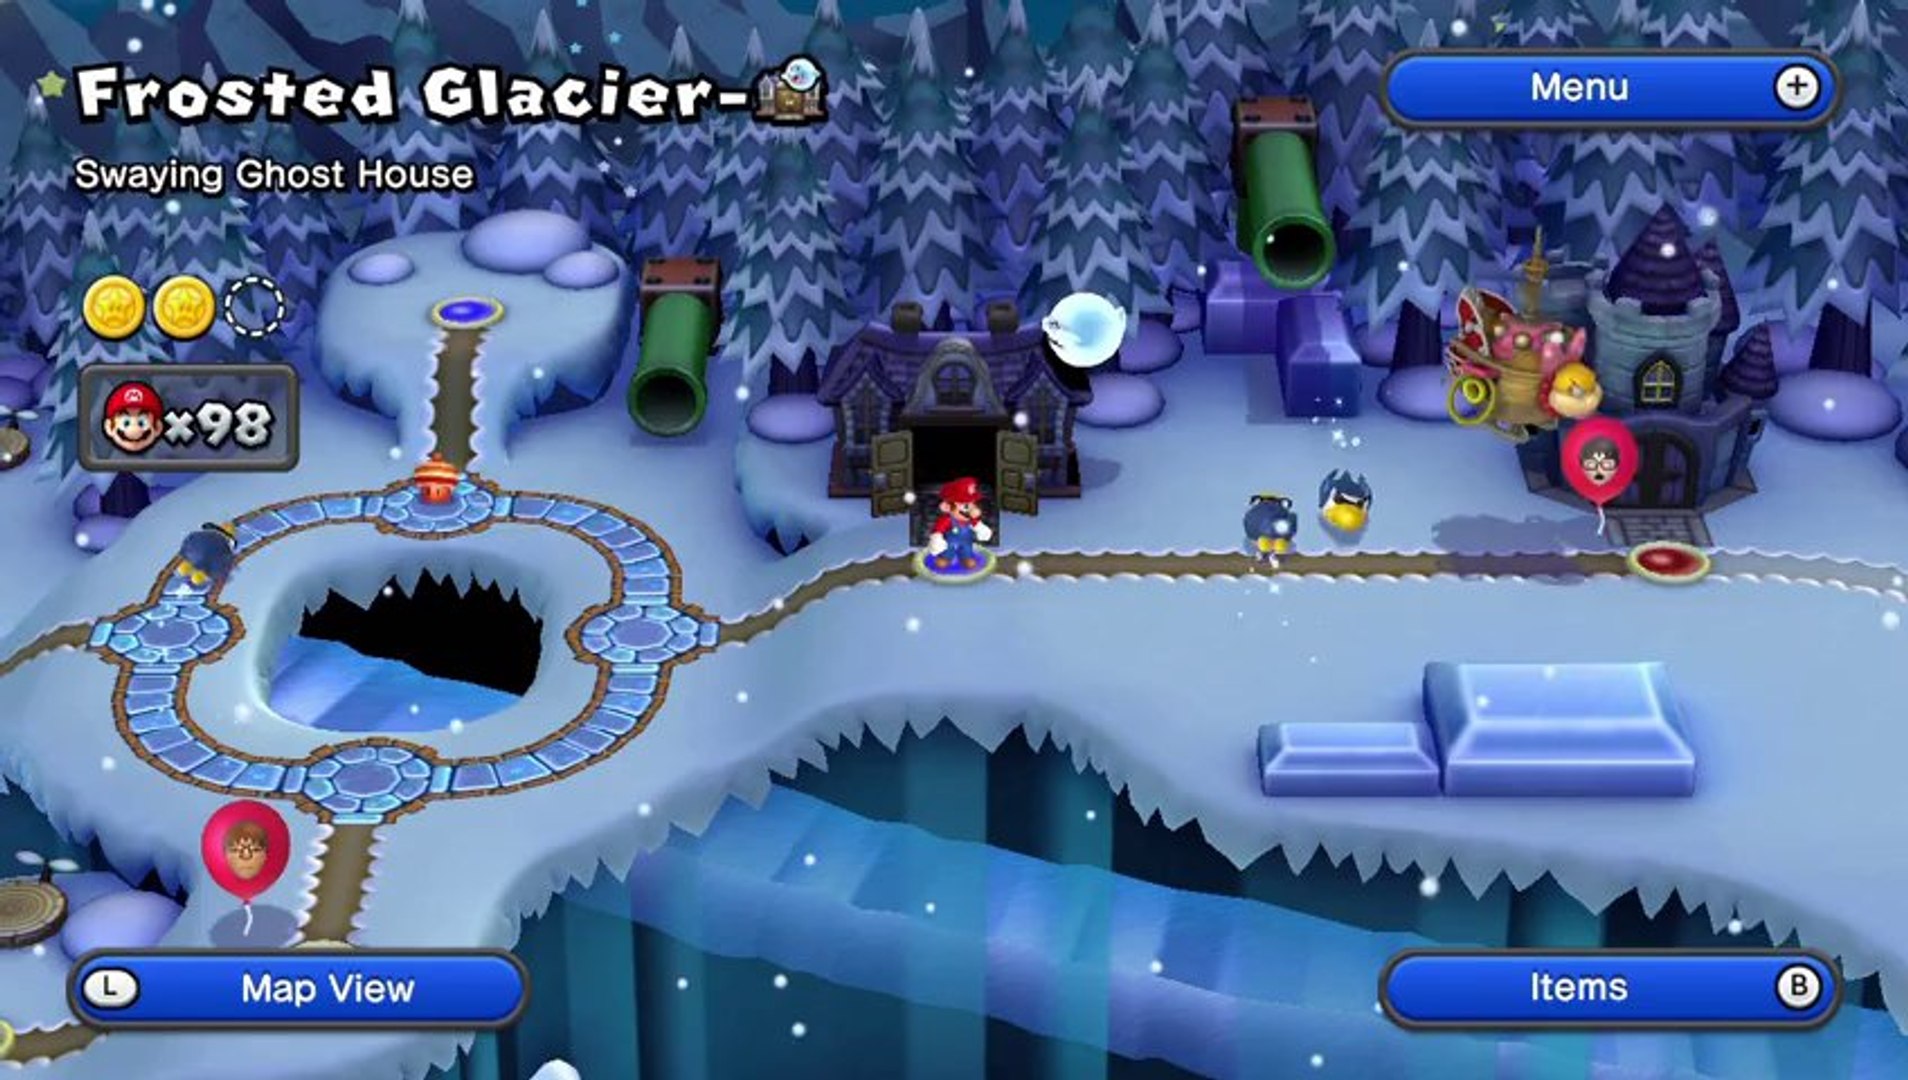 New Super Mario Bros U Walkthrough 32 Frosted Glacier Ghost House All Star Coins...